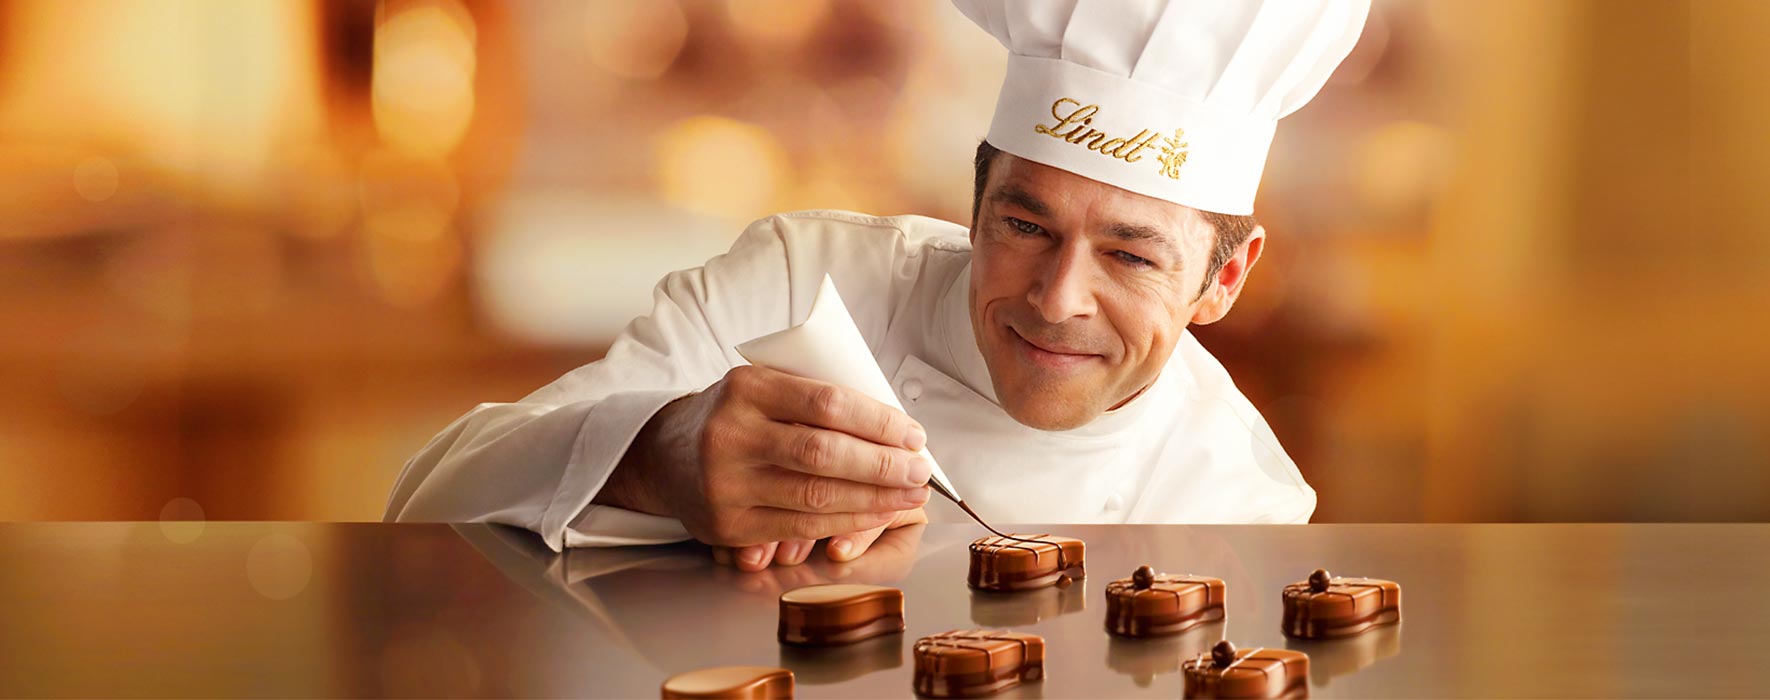 Realization of the Lindt chocolate website